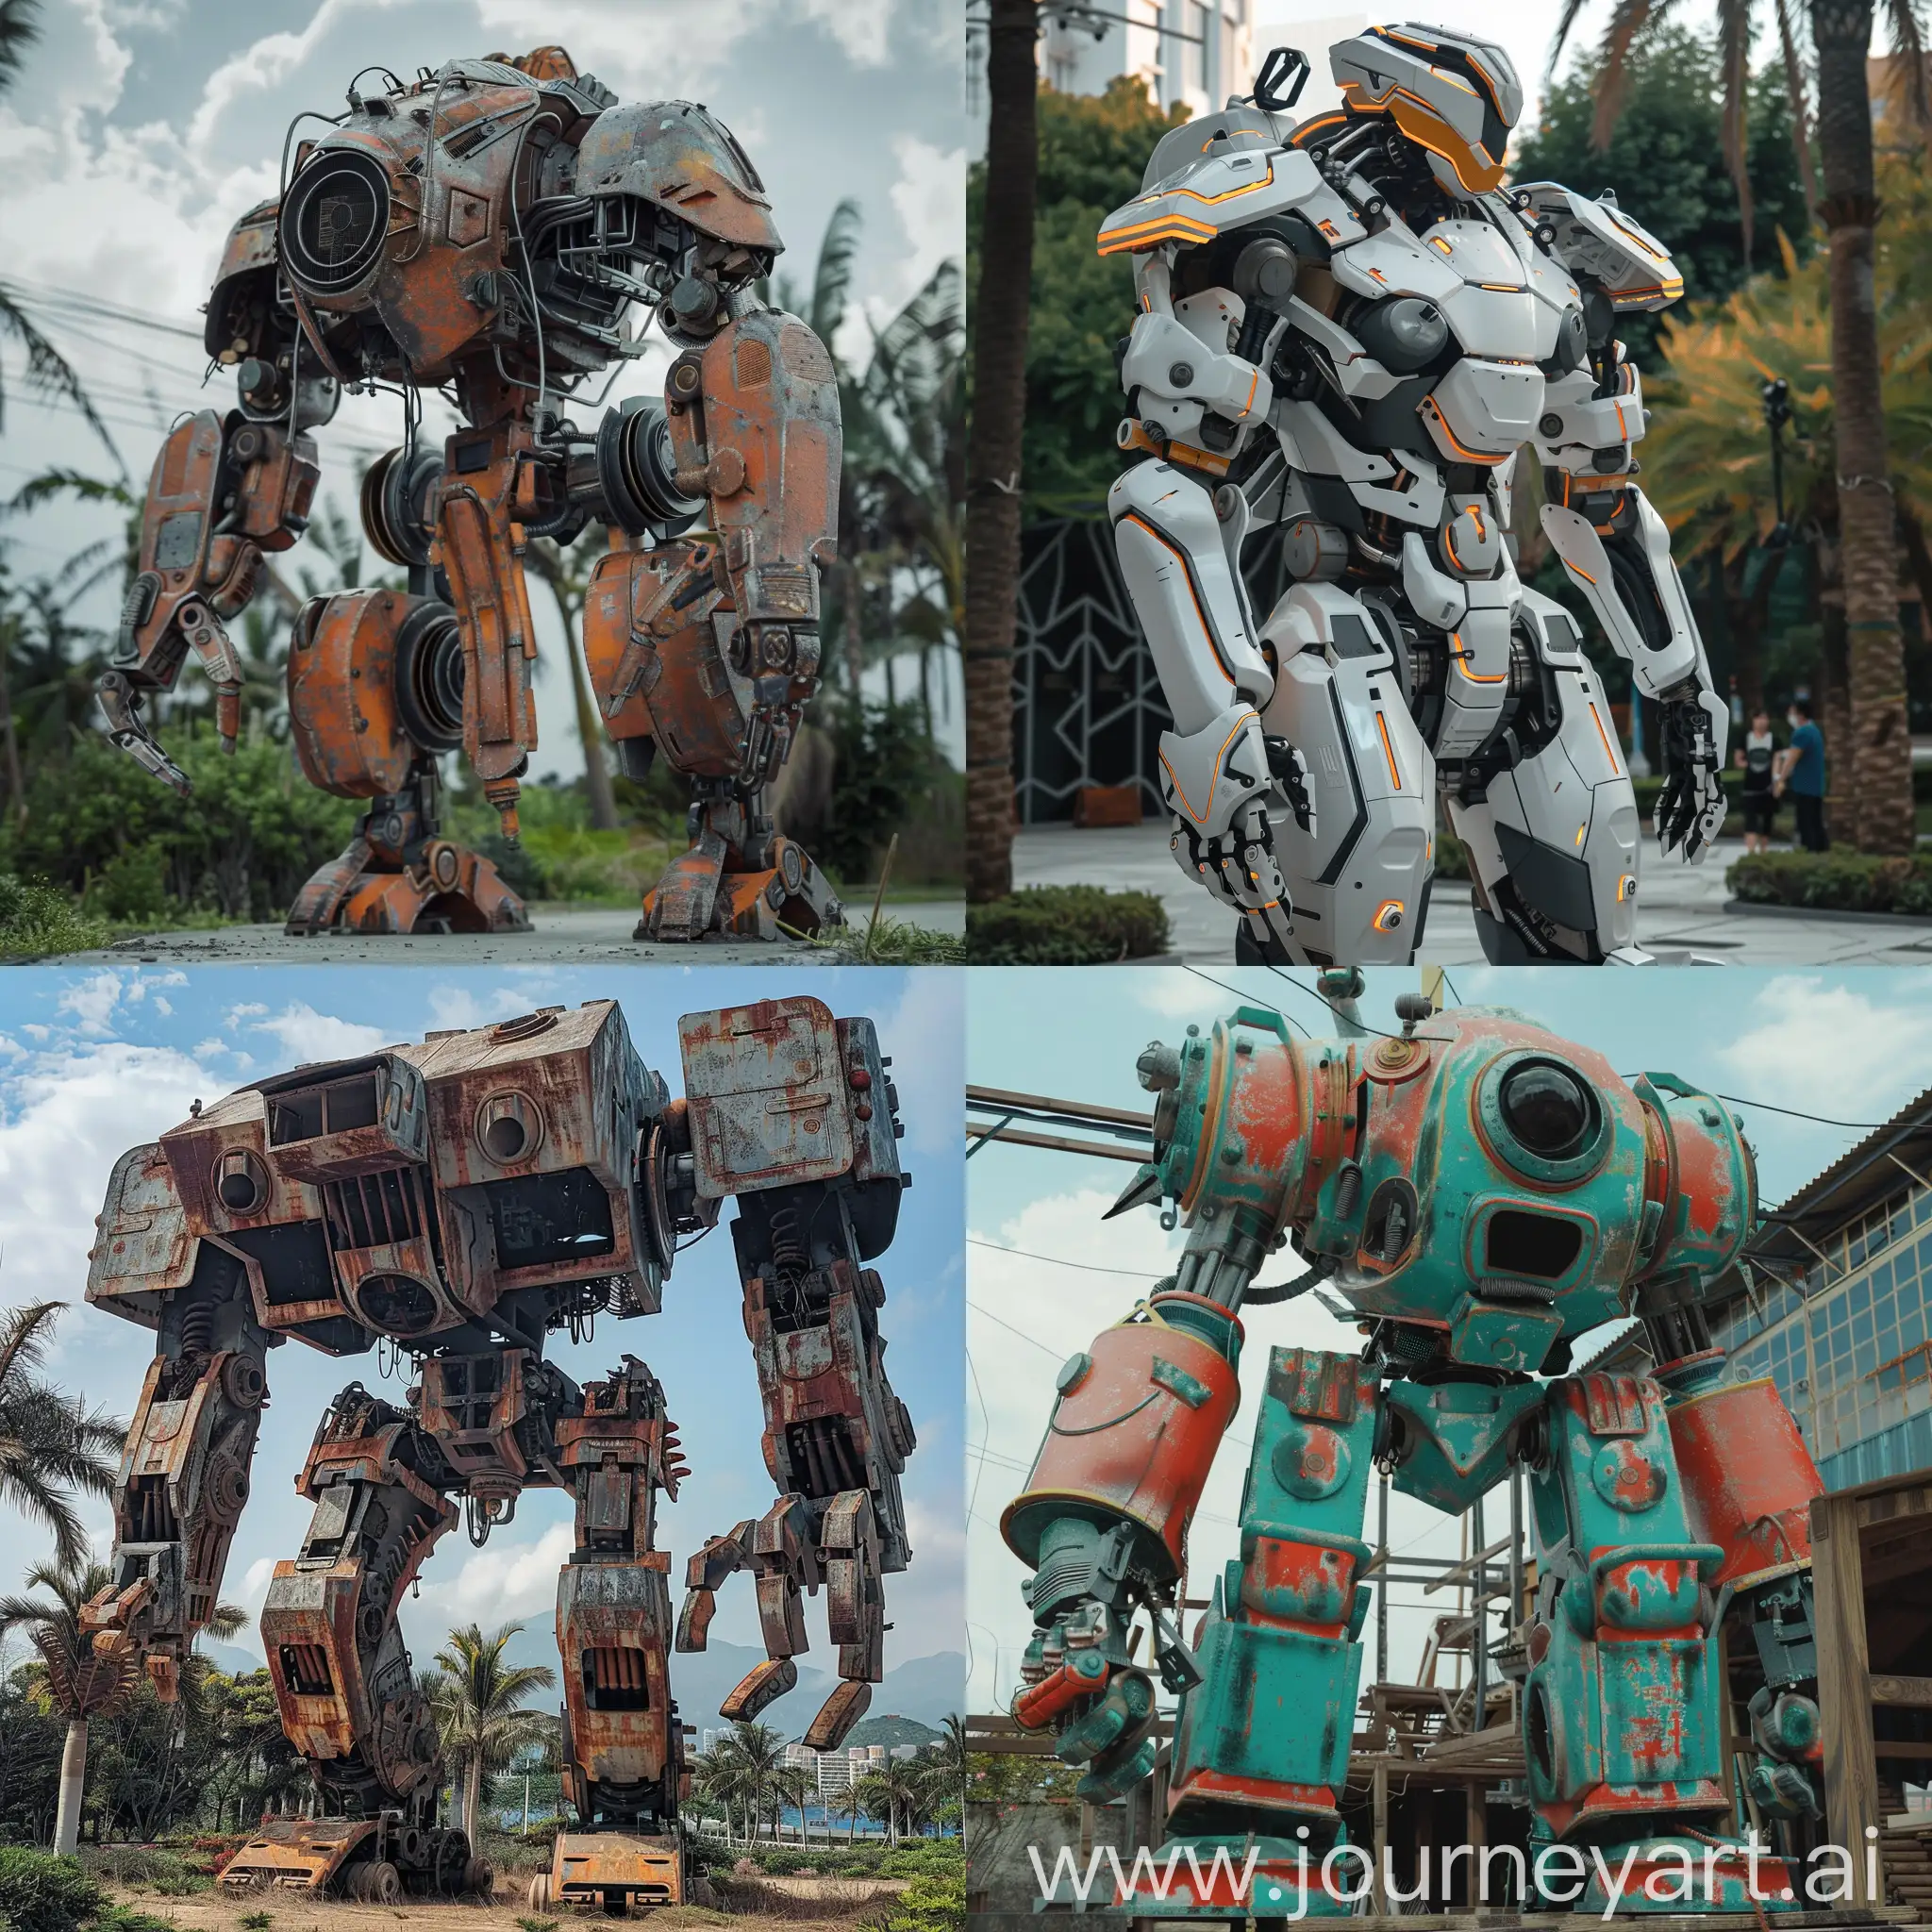 Mechanical-Robots-in-Hainan-Province-Industrial-Innovation-and-Tradition